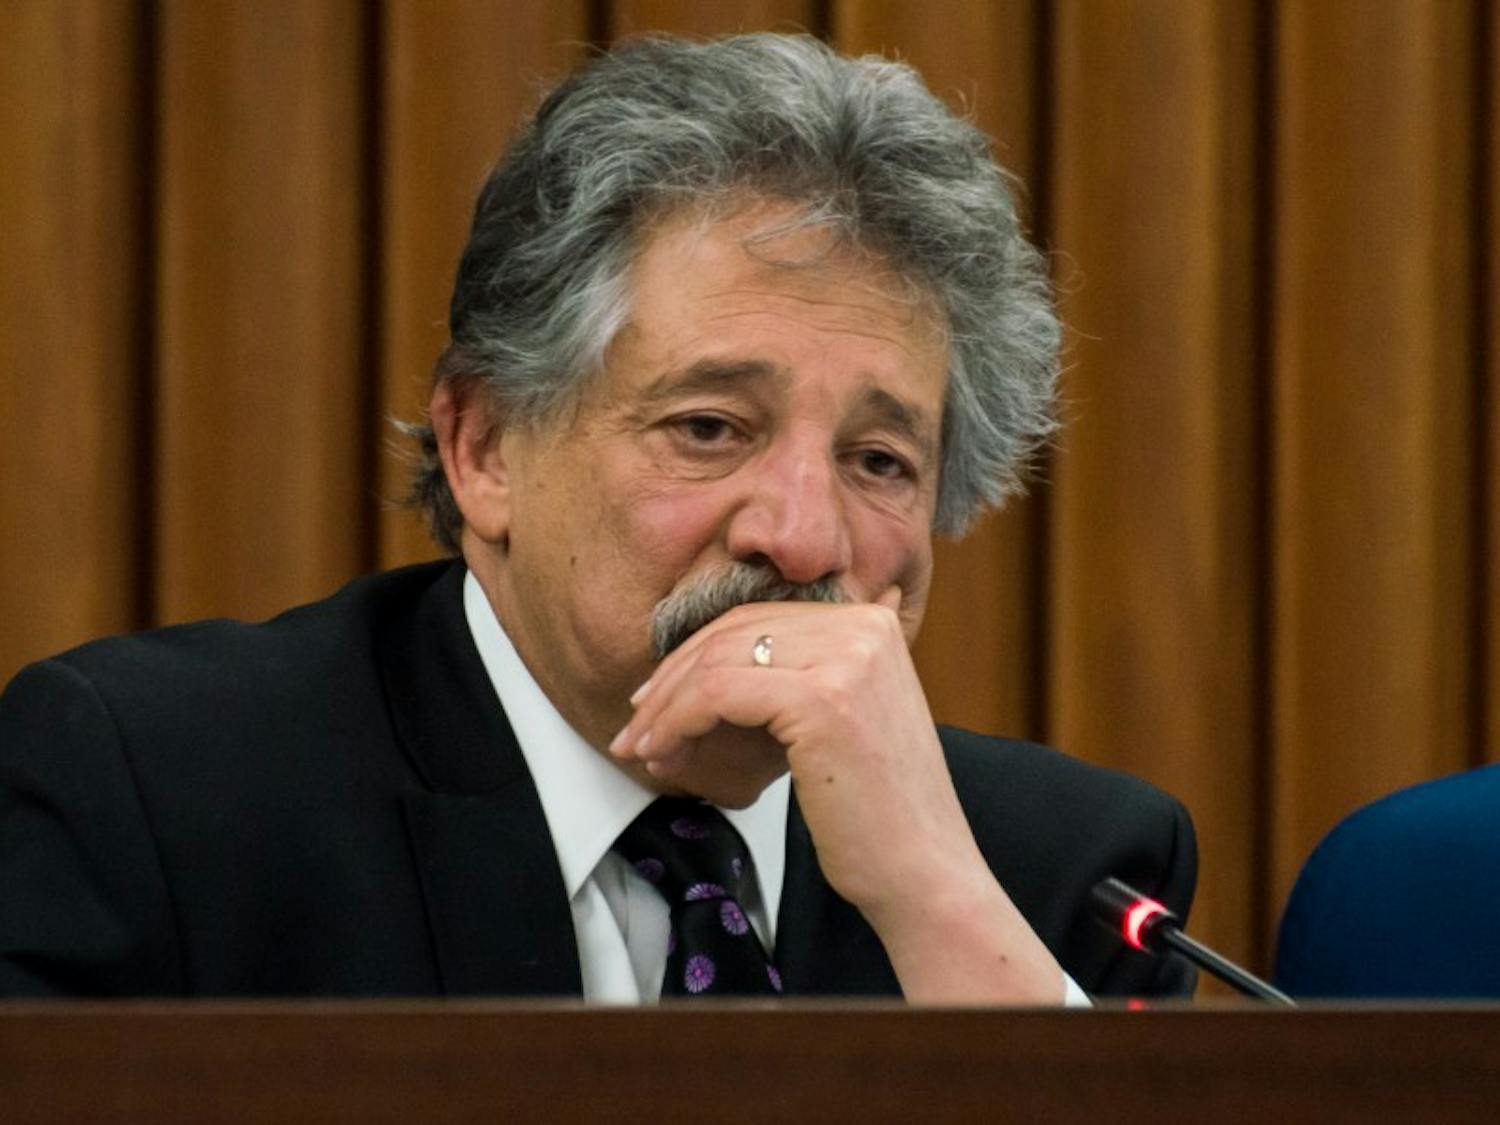 Madison Mayor Paul Soglin held a press conference Wednesday to publicly oppose the state legislature’s restrictions on municipalities.